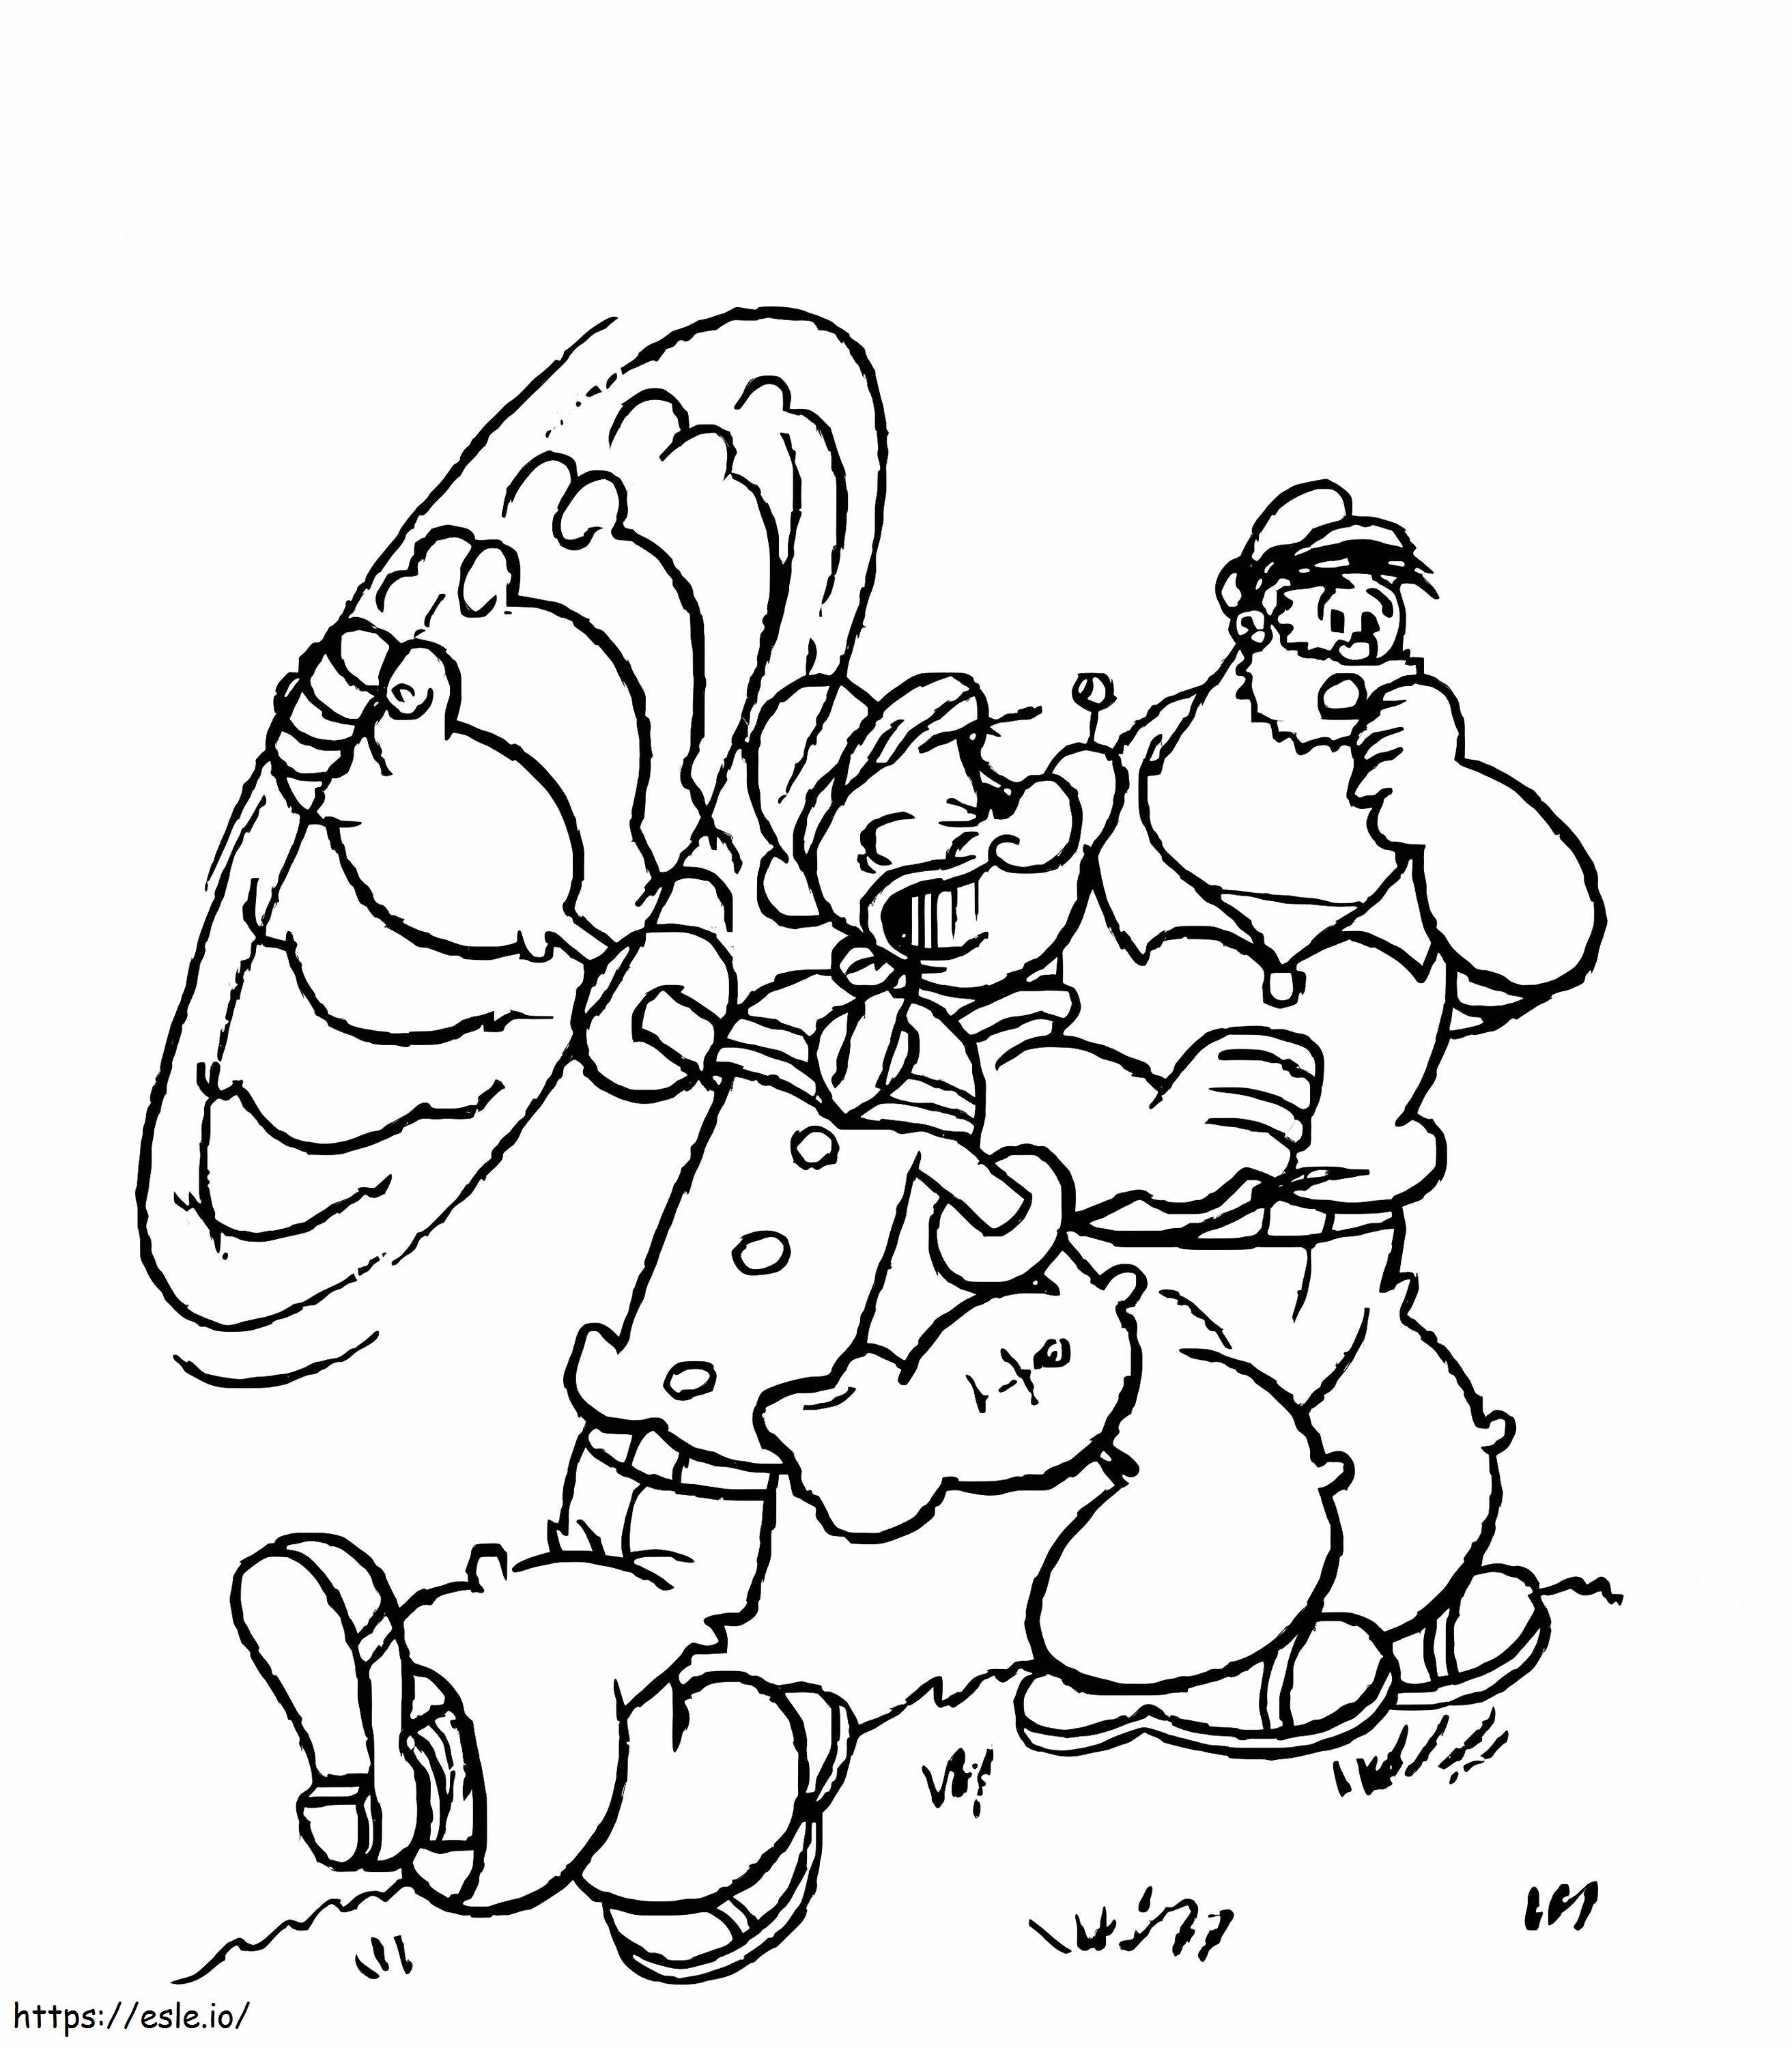 Popeye With Bluto coloring page